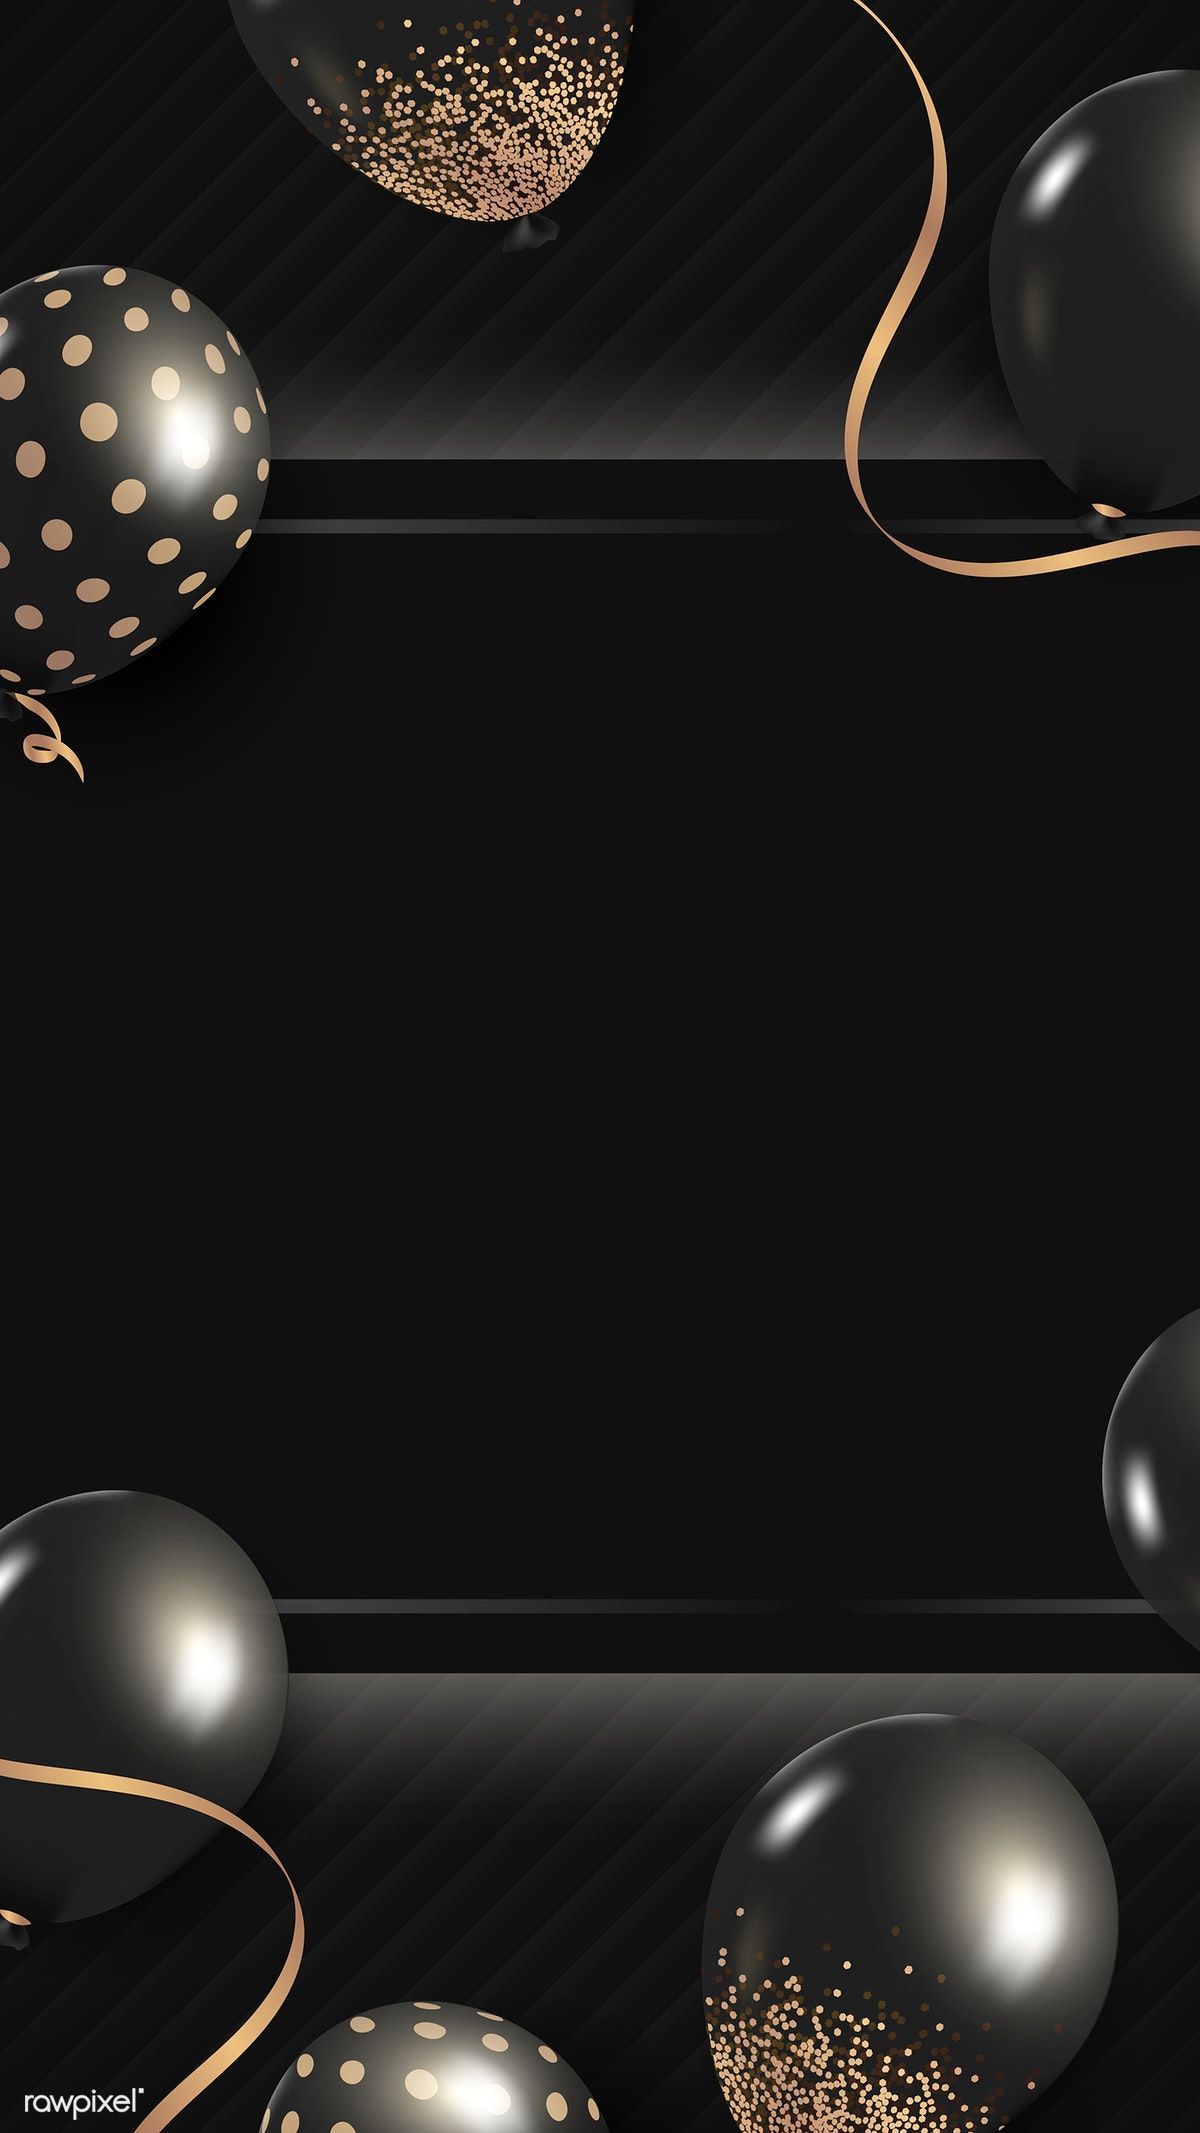 Download premium vector of Black and gold balloons on a black background - Balloons